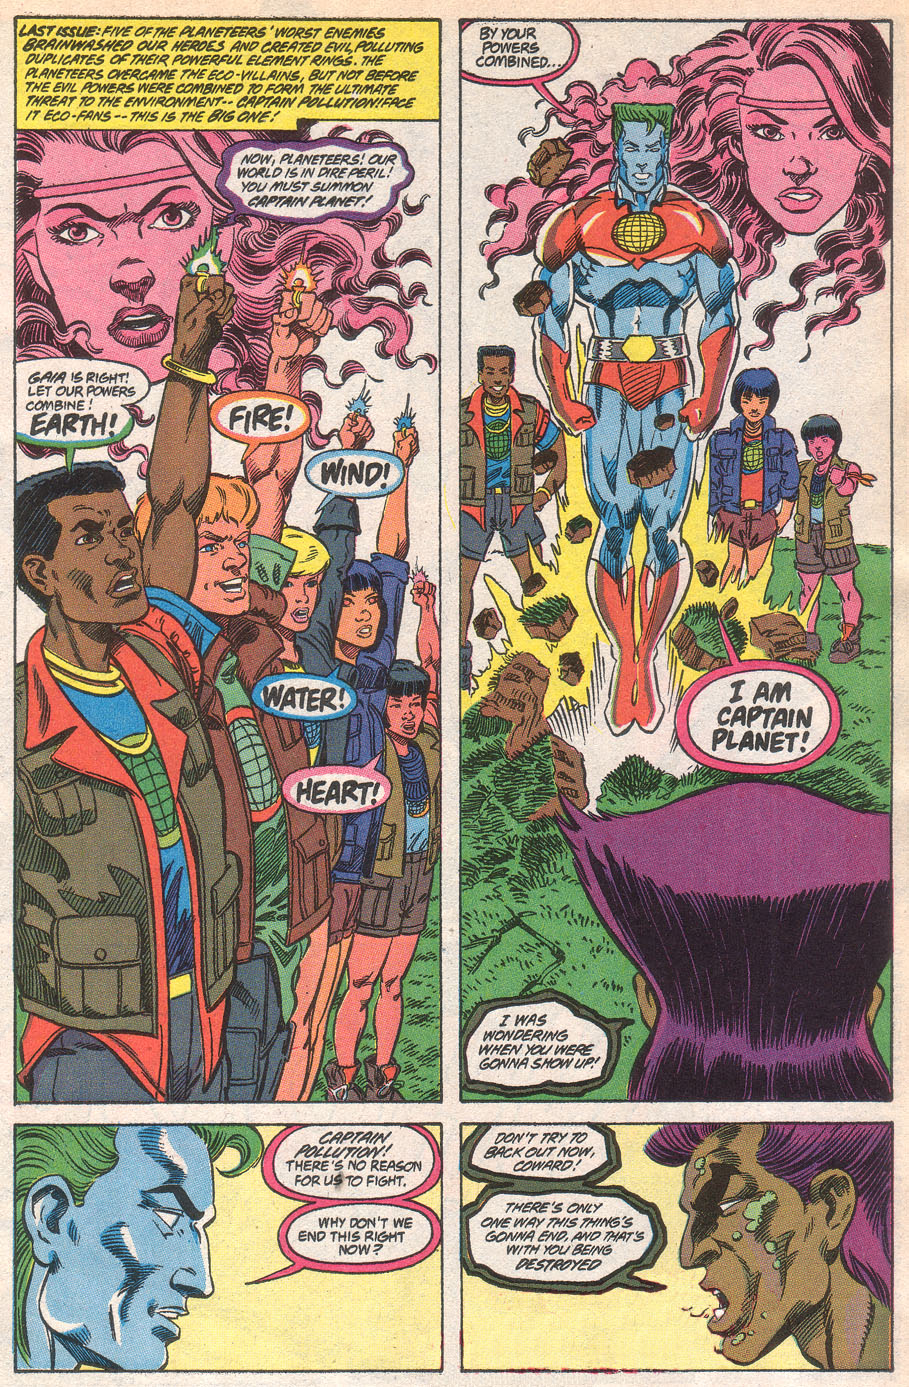 Captain Planet and the Planeteers 8 Page 2